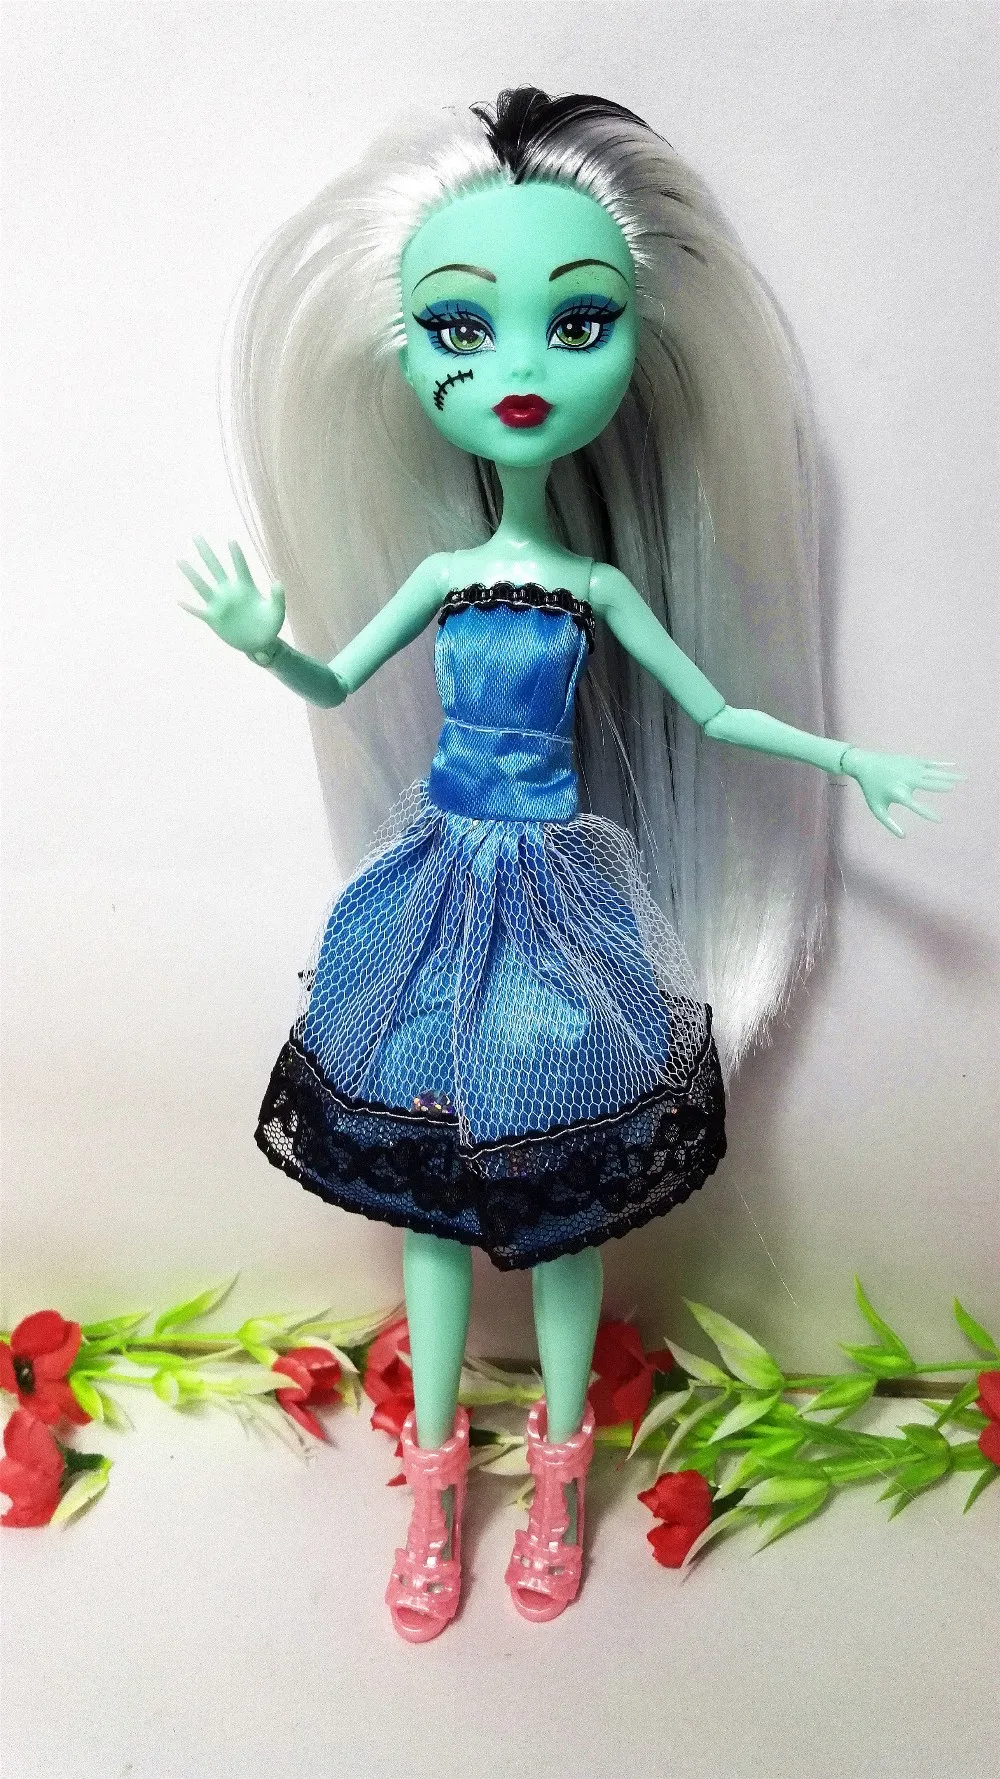 4pcslot-New-style-monster-fun-high-Dolls-Monster-Draculaura-hight-Moveable-Jointchildren-best-gift-Wholesale-fashion-dolls-4